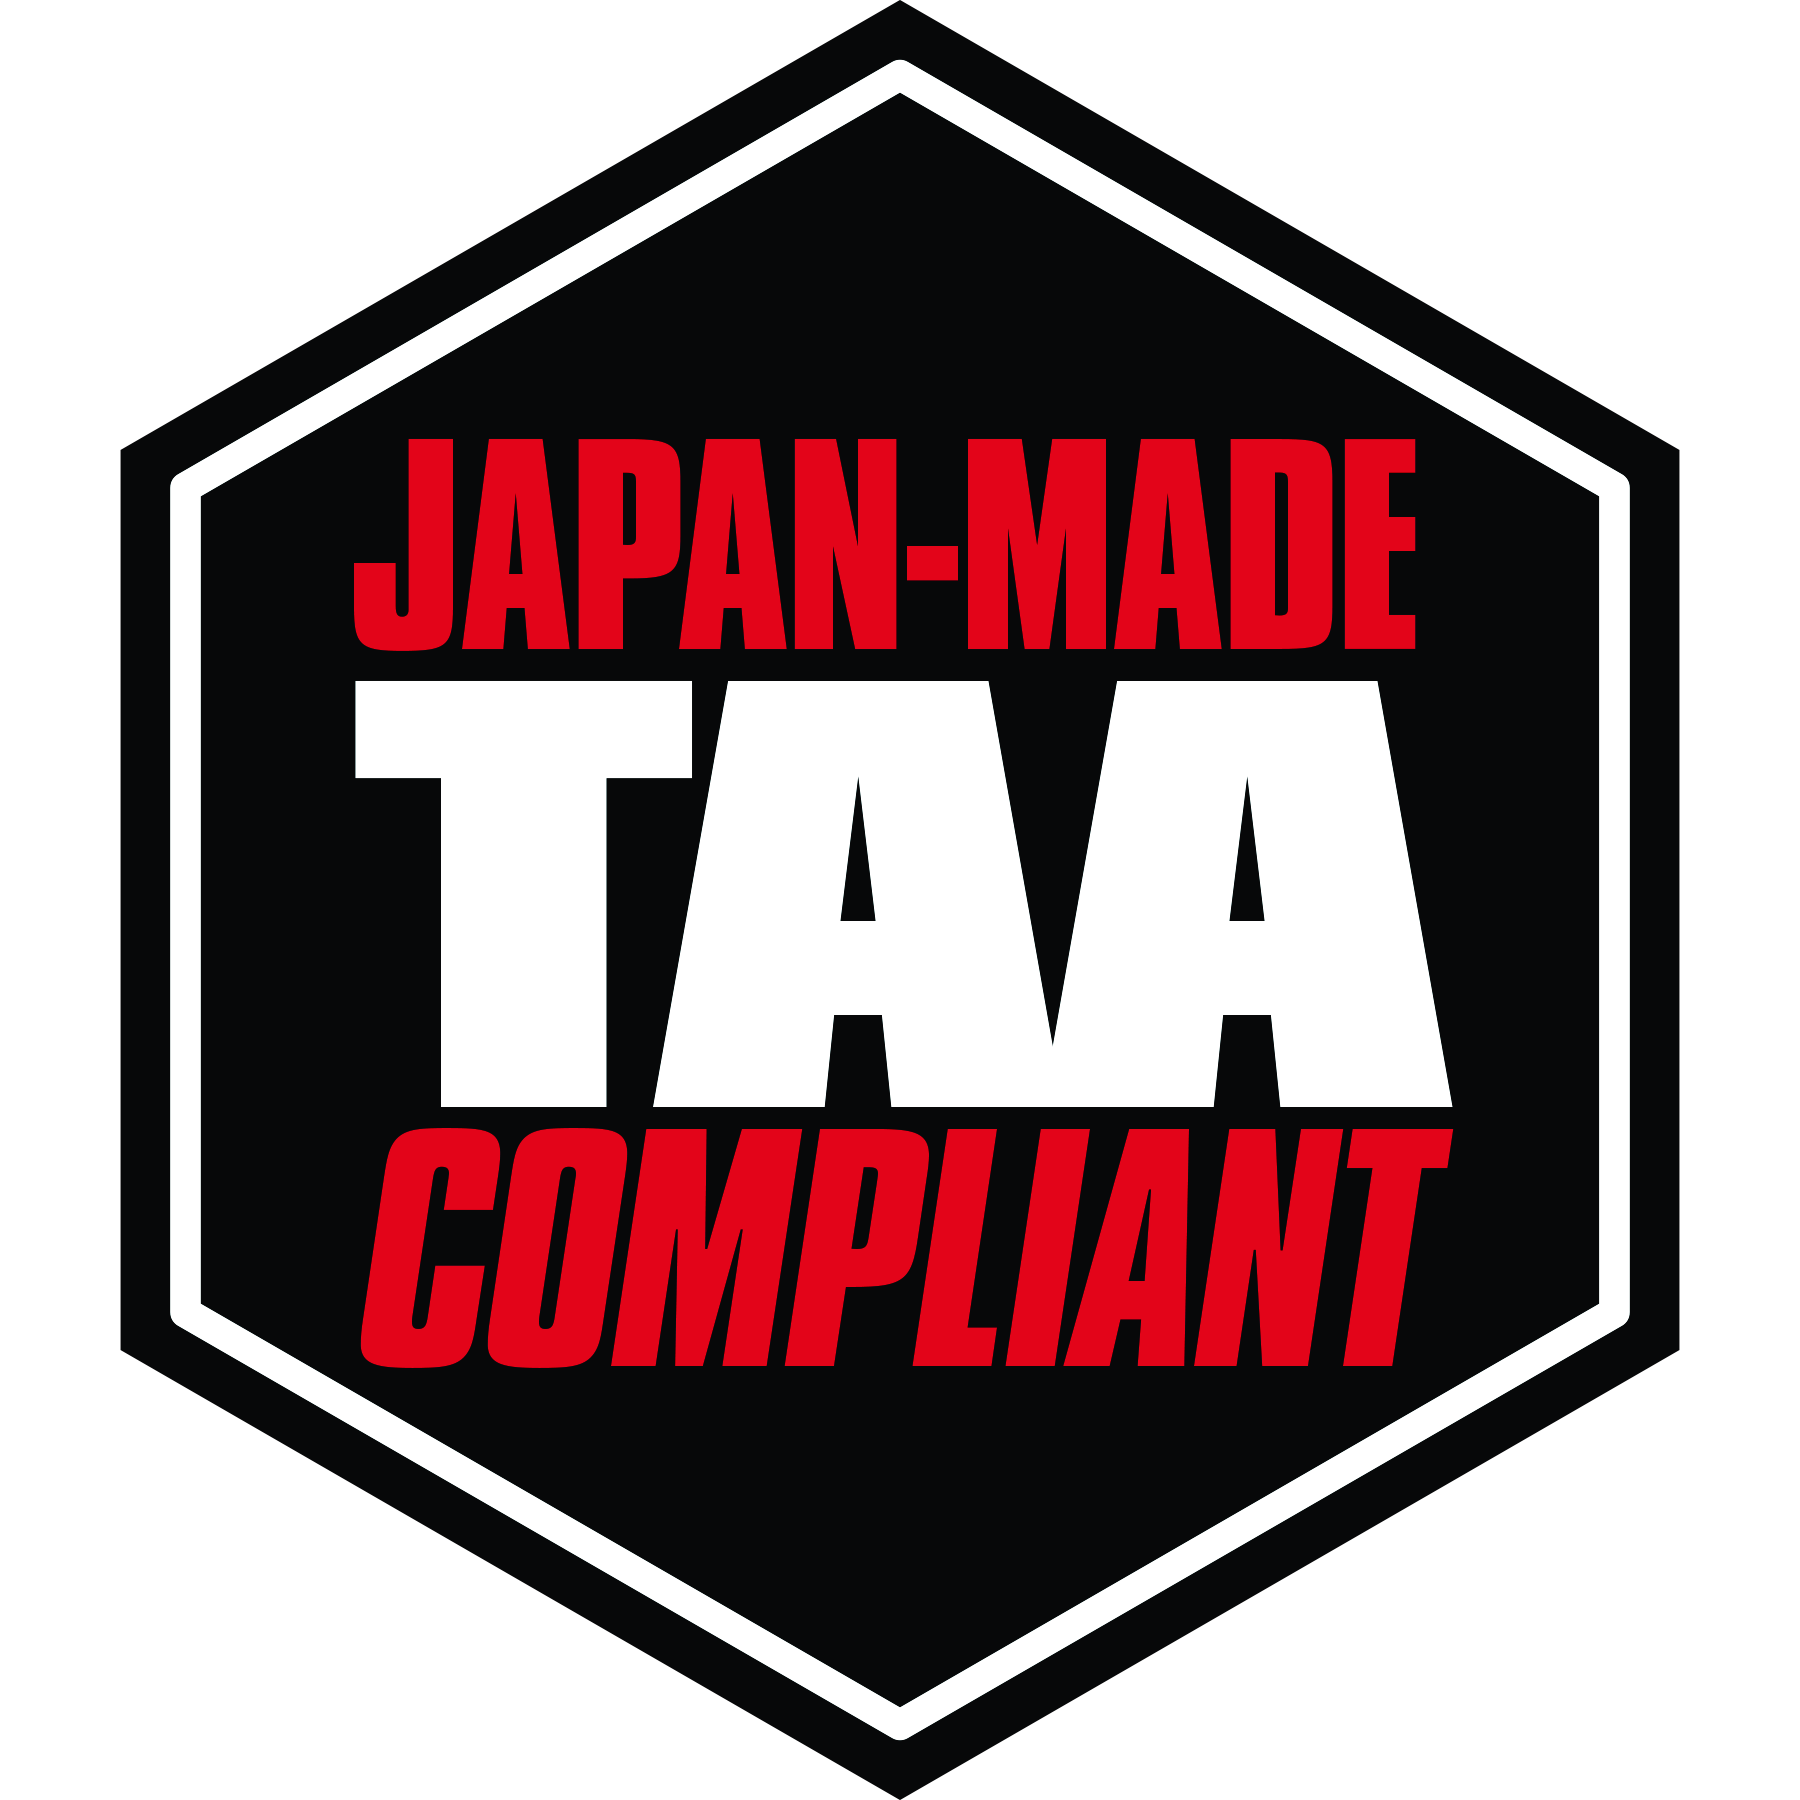 A japan-made taa compliant logo in a hexagon on a white background.